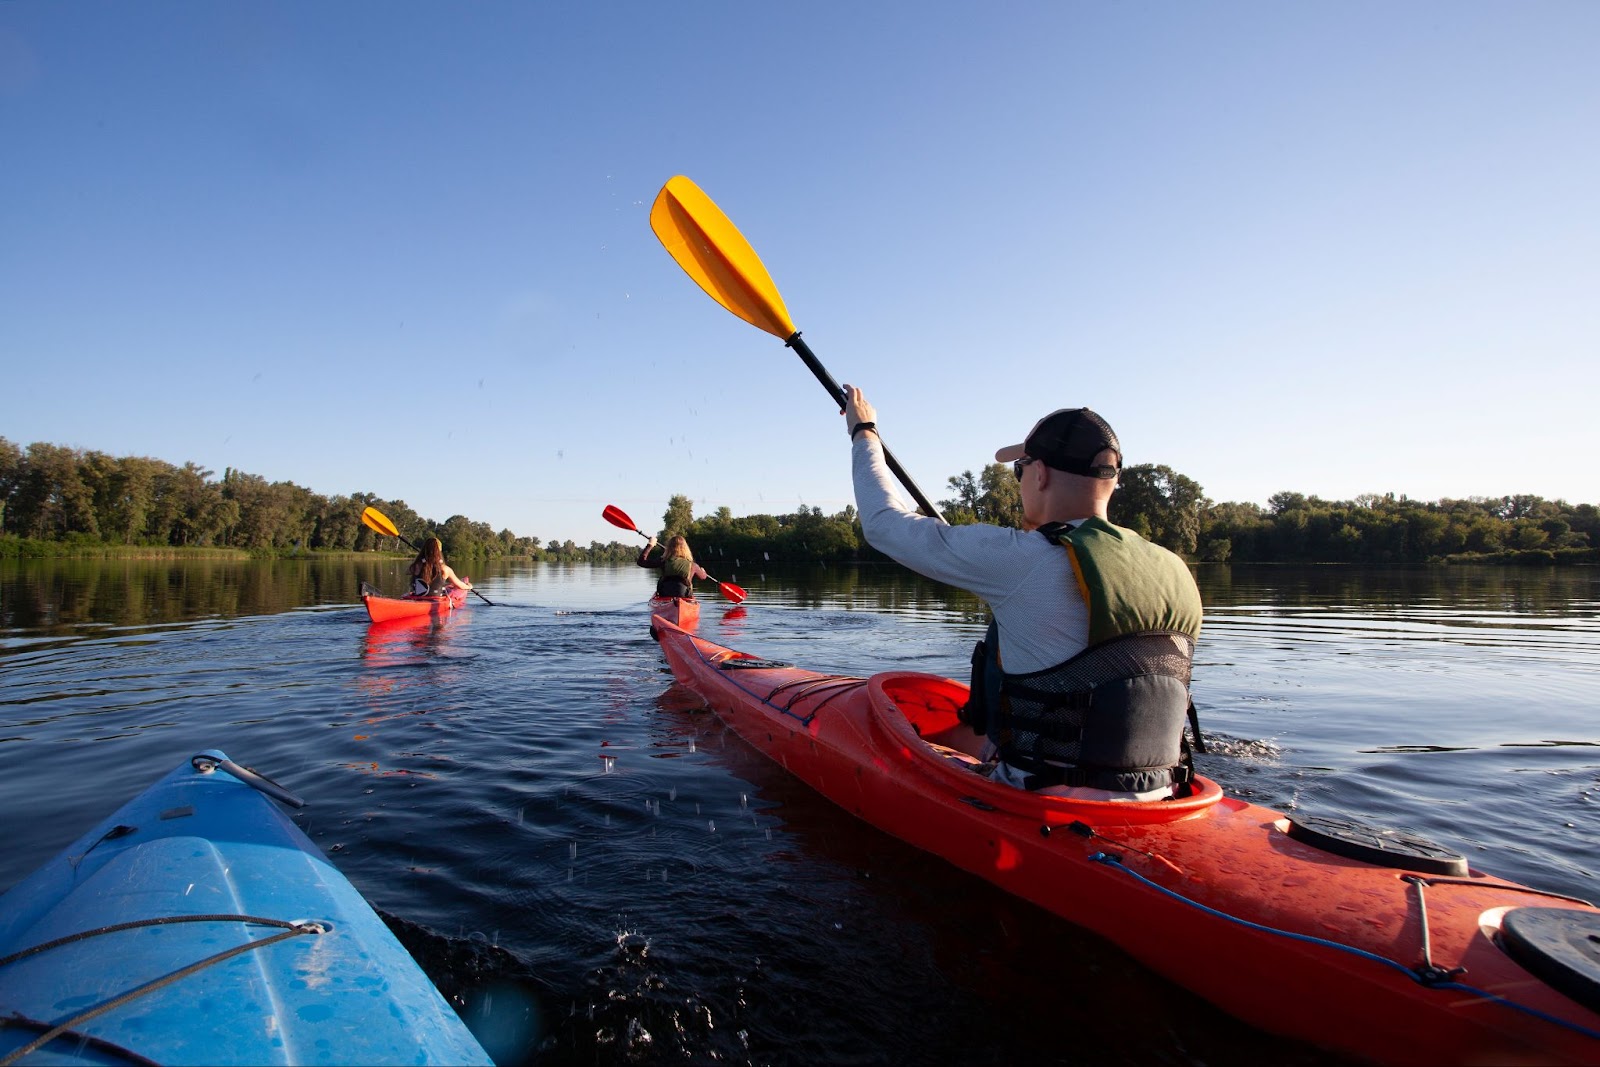 What to wear kayaking: Get fully kitted out for a paddling adventure